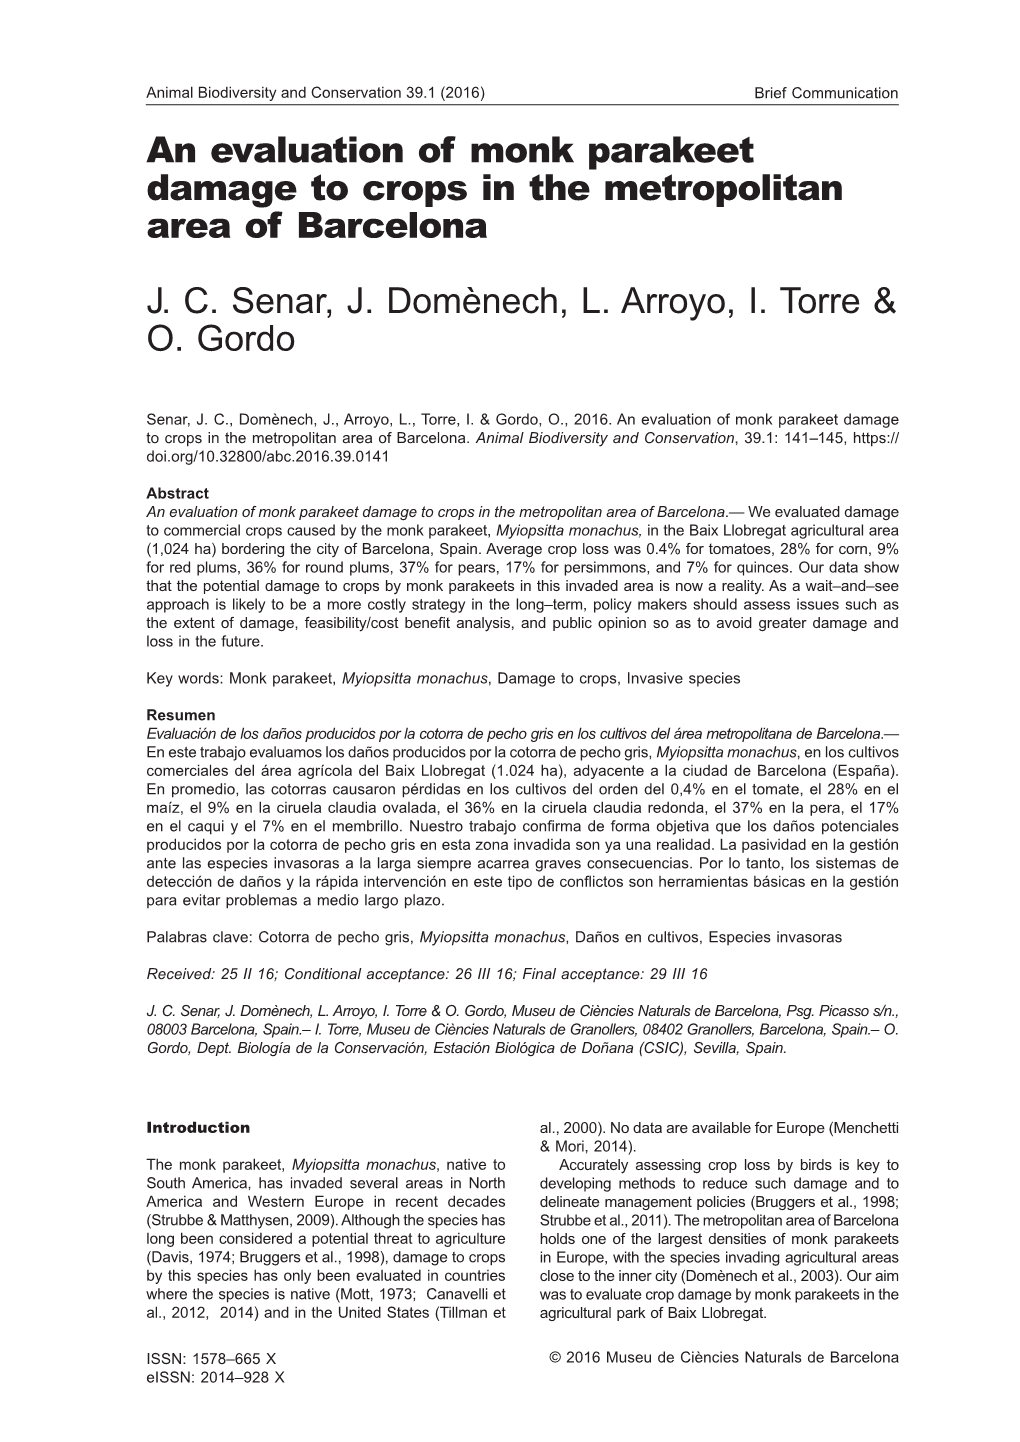 An Evaluation of Monk Parakeet Damage to Crops in the Metropolitan Area of Barcelona